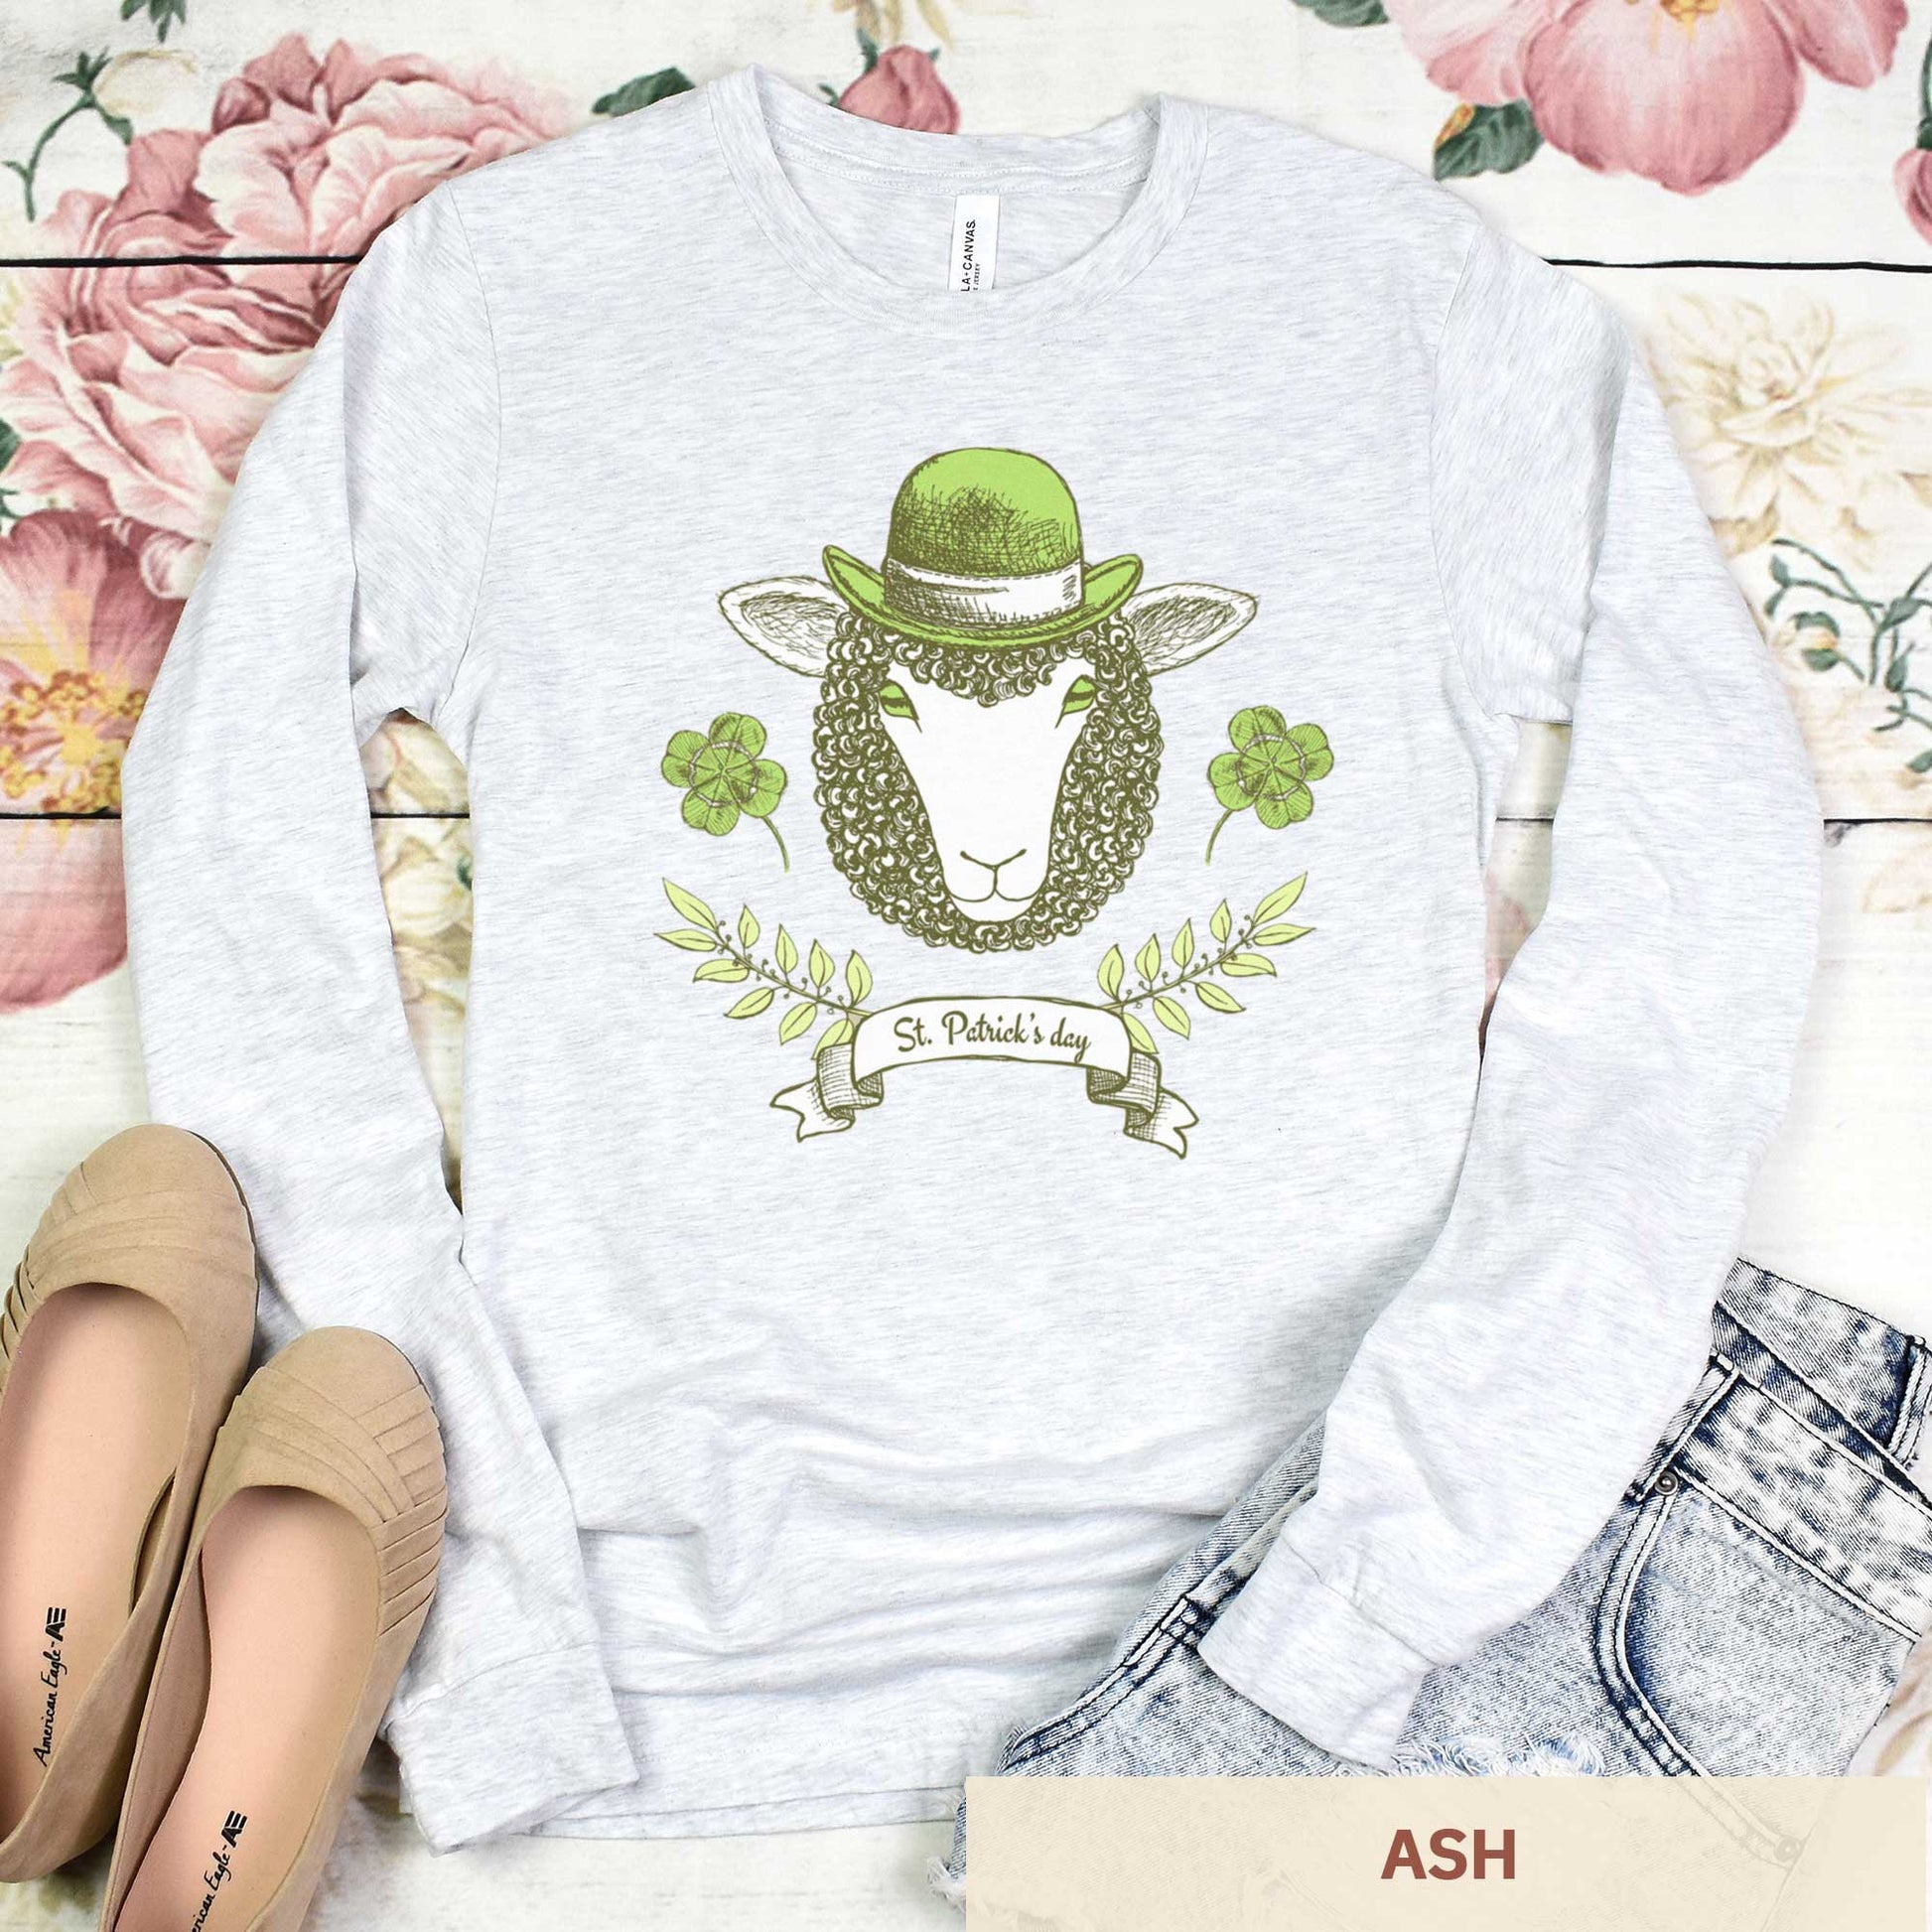 A long sleeved ash Bella Canvas t-shirt featuring a sheep with a green hat, clovers and the words St.Patrick's Day.